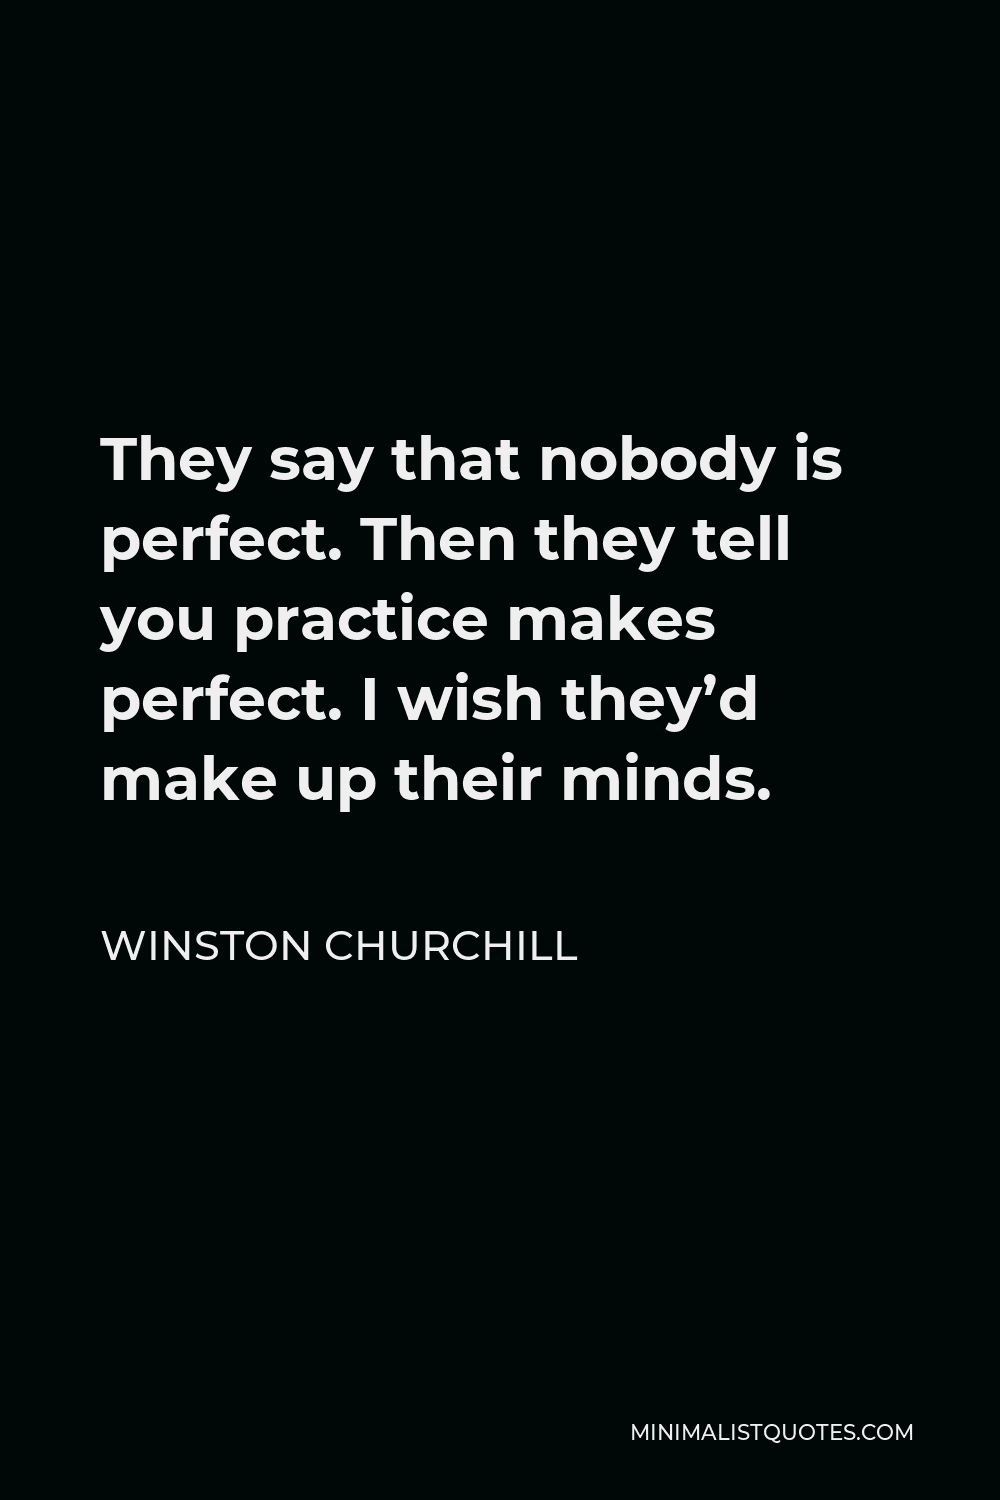 Winston Churchill Quote - They say that nobody is perfect. Then they tell you practice makes perfect. I wish they’d make up their minds.